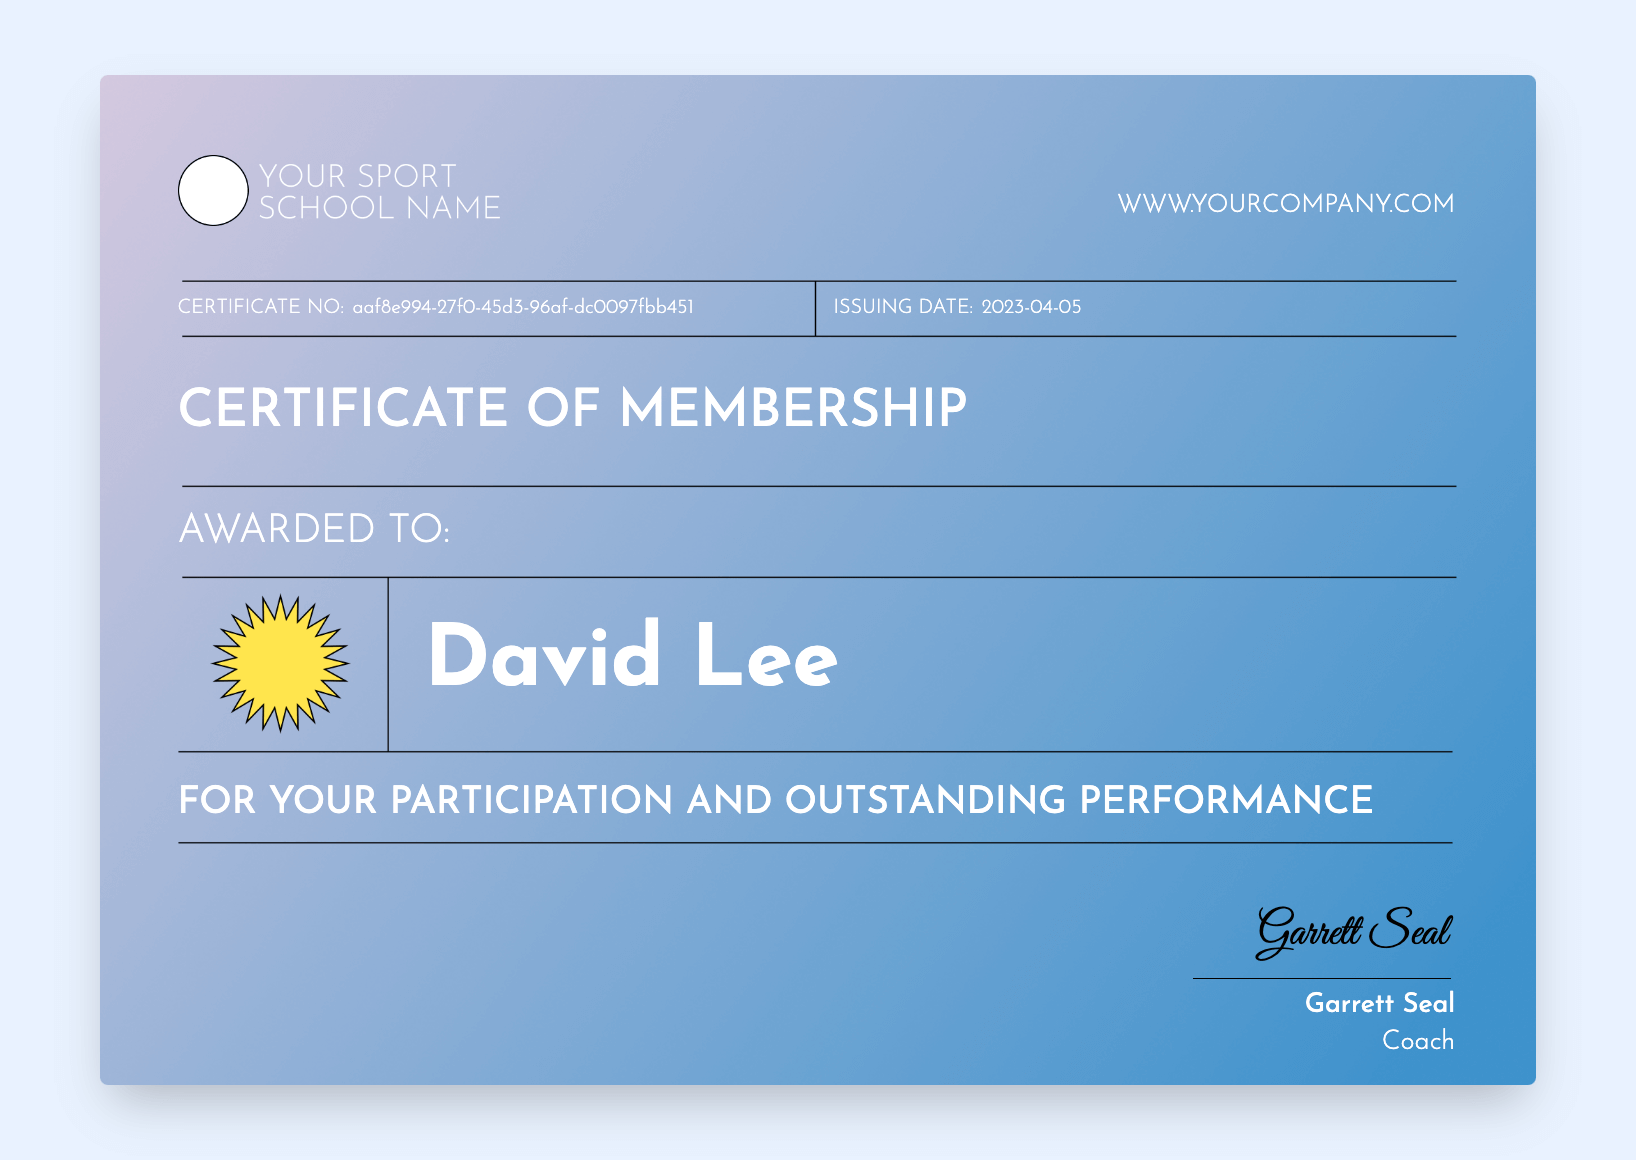 Funny and colorful certificate of membership template.